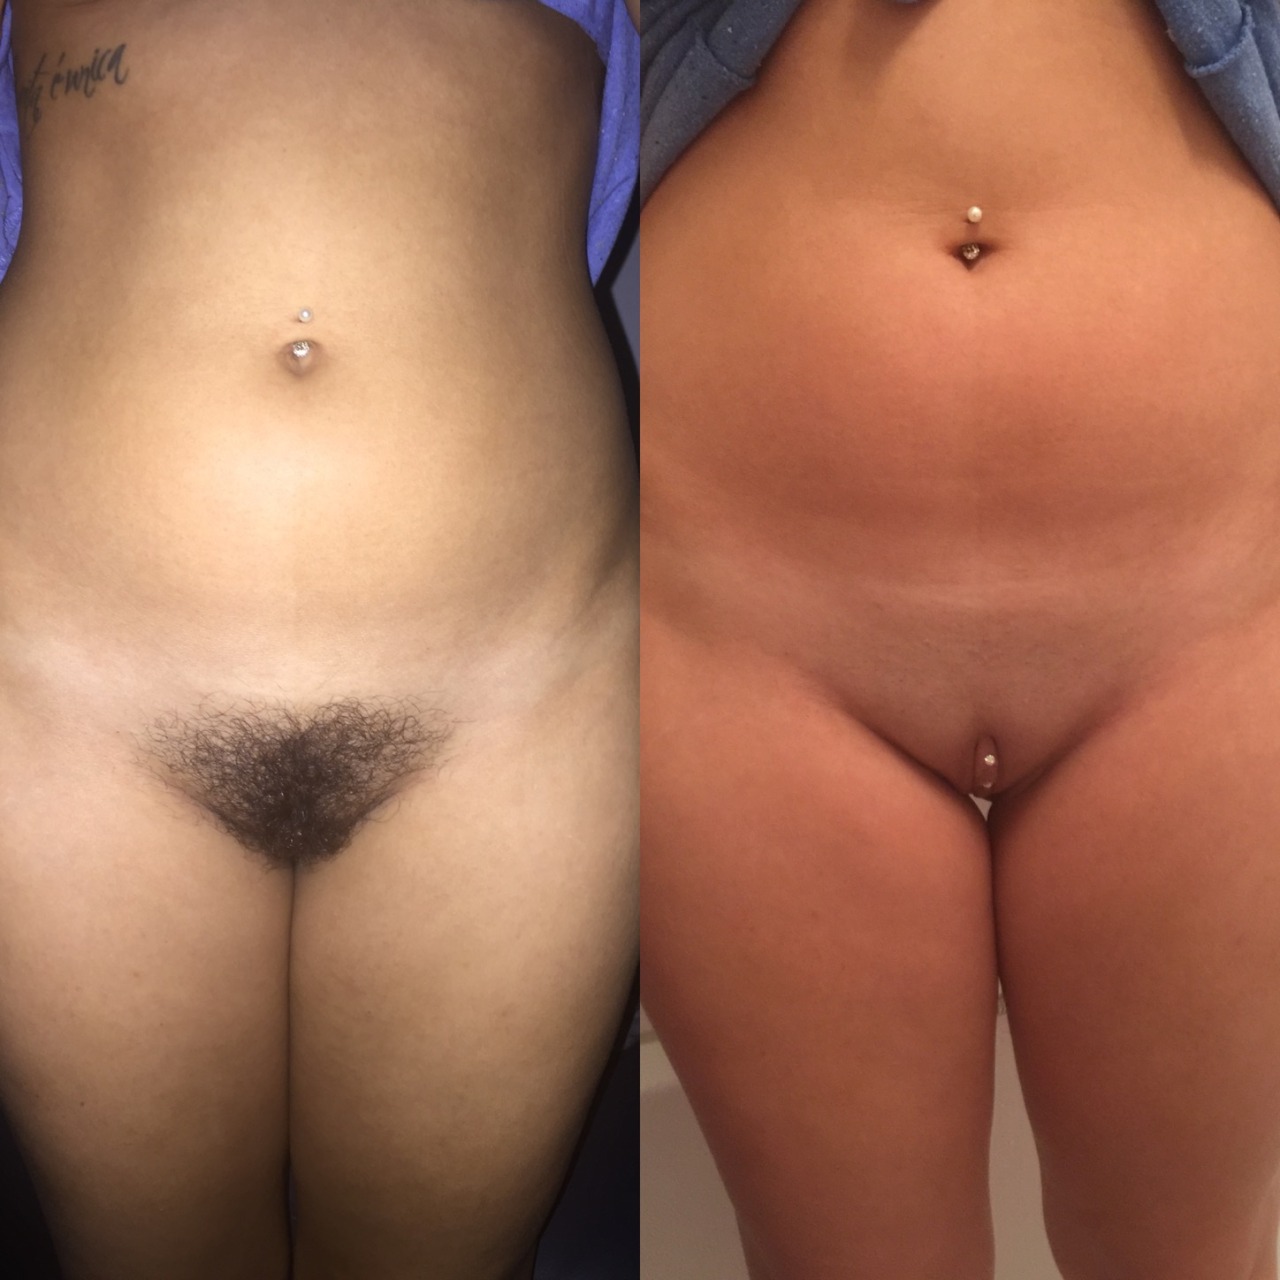 Vaginal waxing pictures before and after.